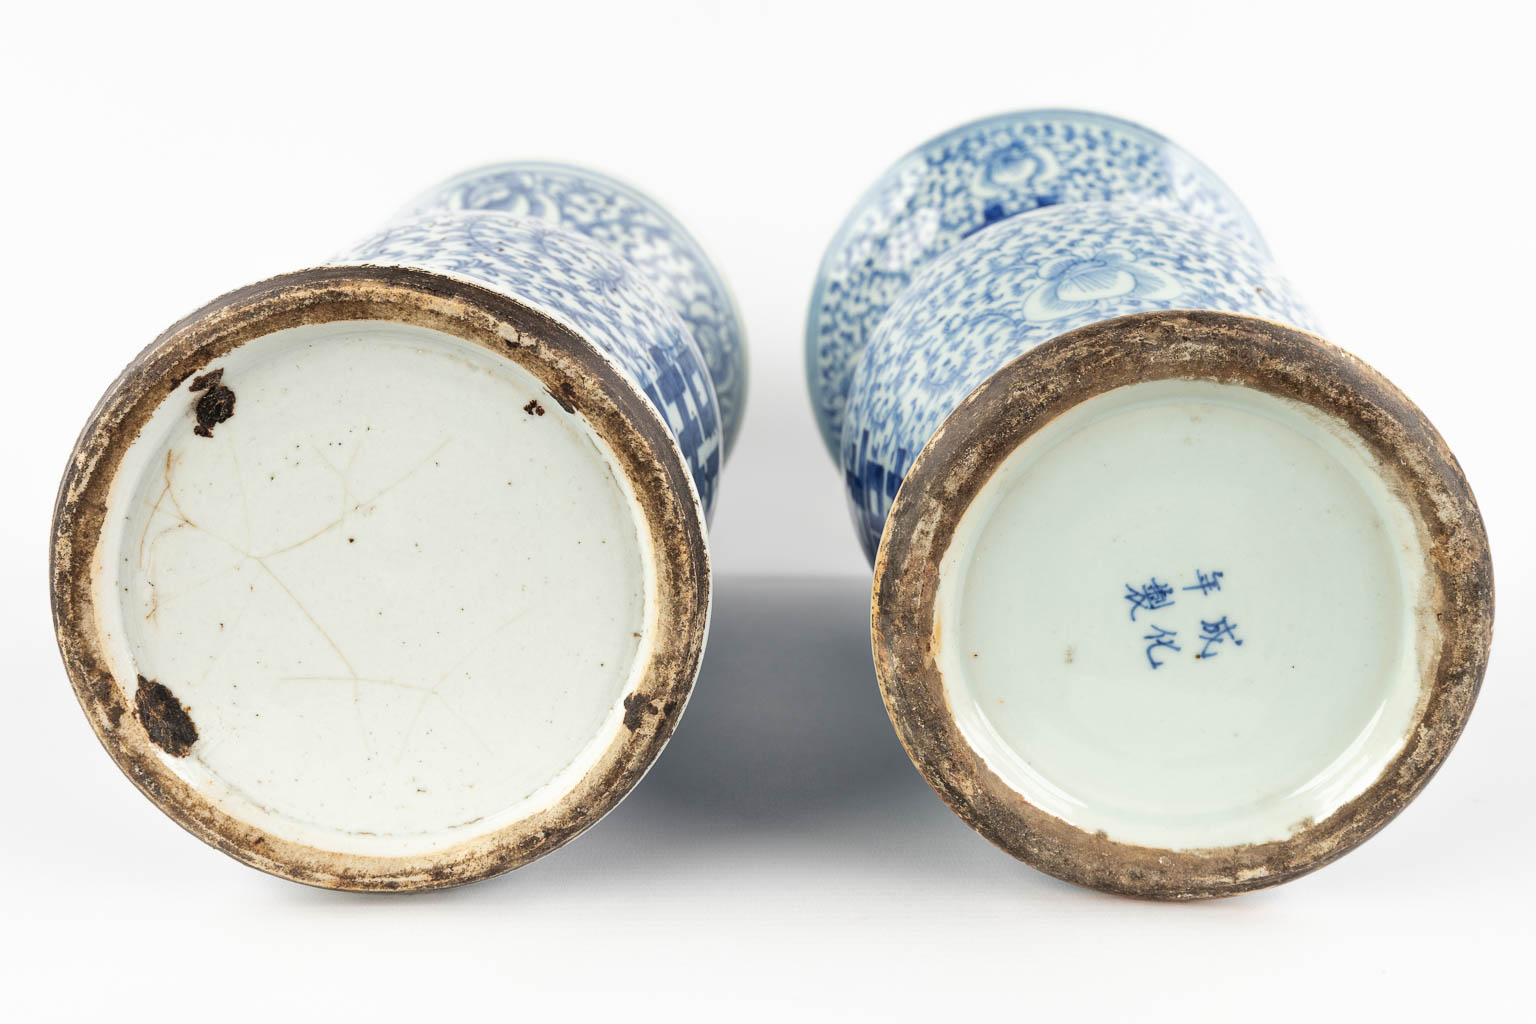 Three Chinese vases with a blue-white decor and Celadon. 19th/20th C. (H:43 x D:19 cm)